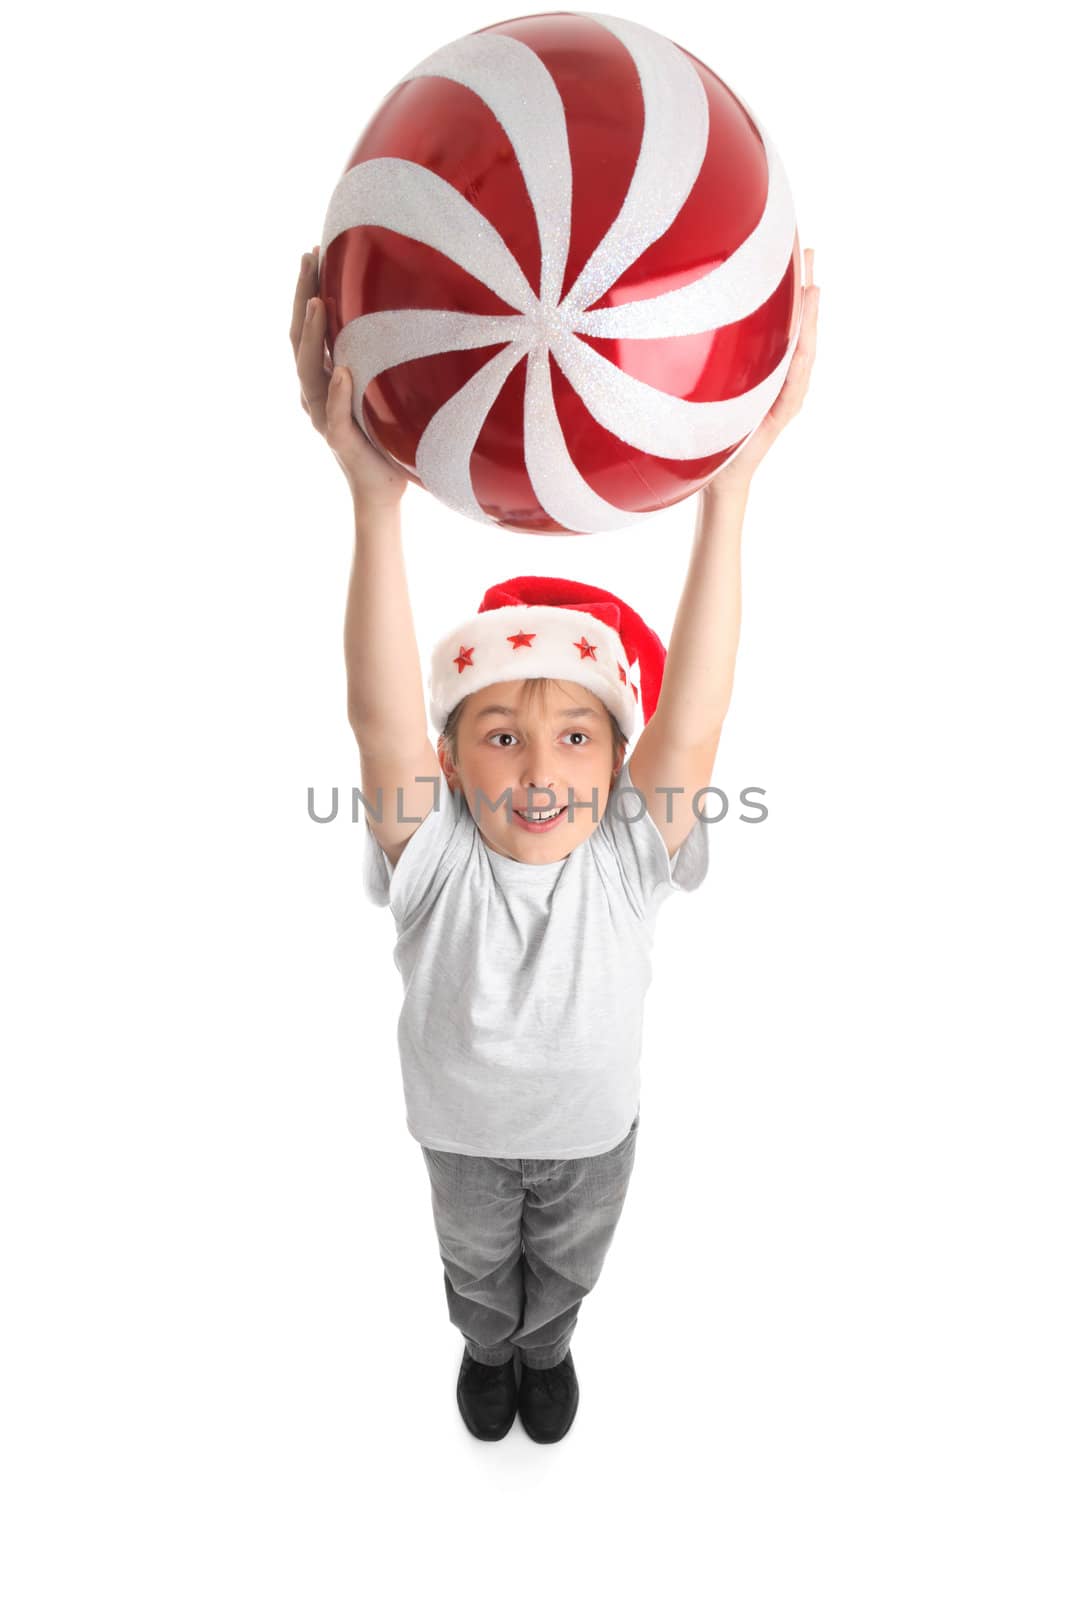 A smiling boy holding a large Christmas bauble in two hands above his head.